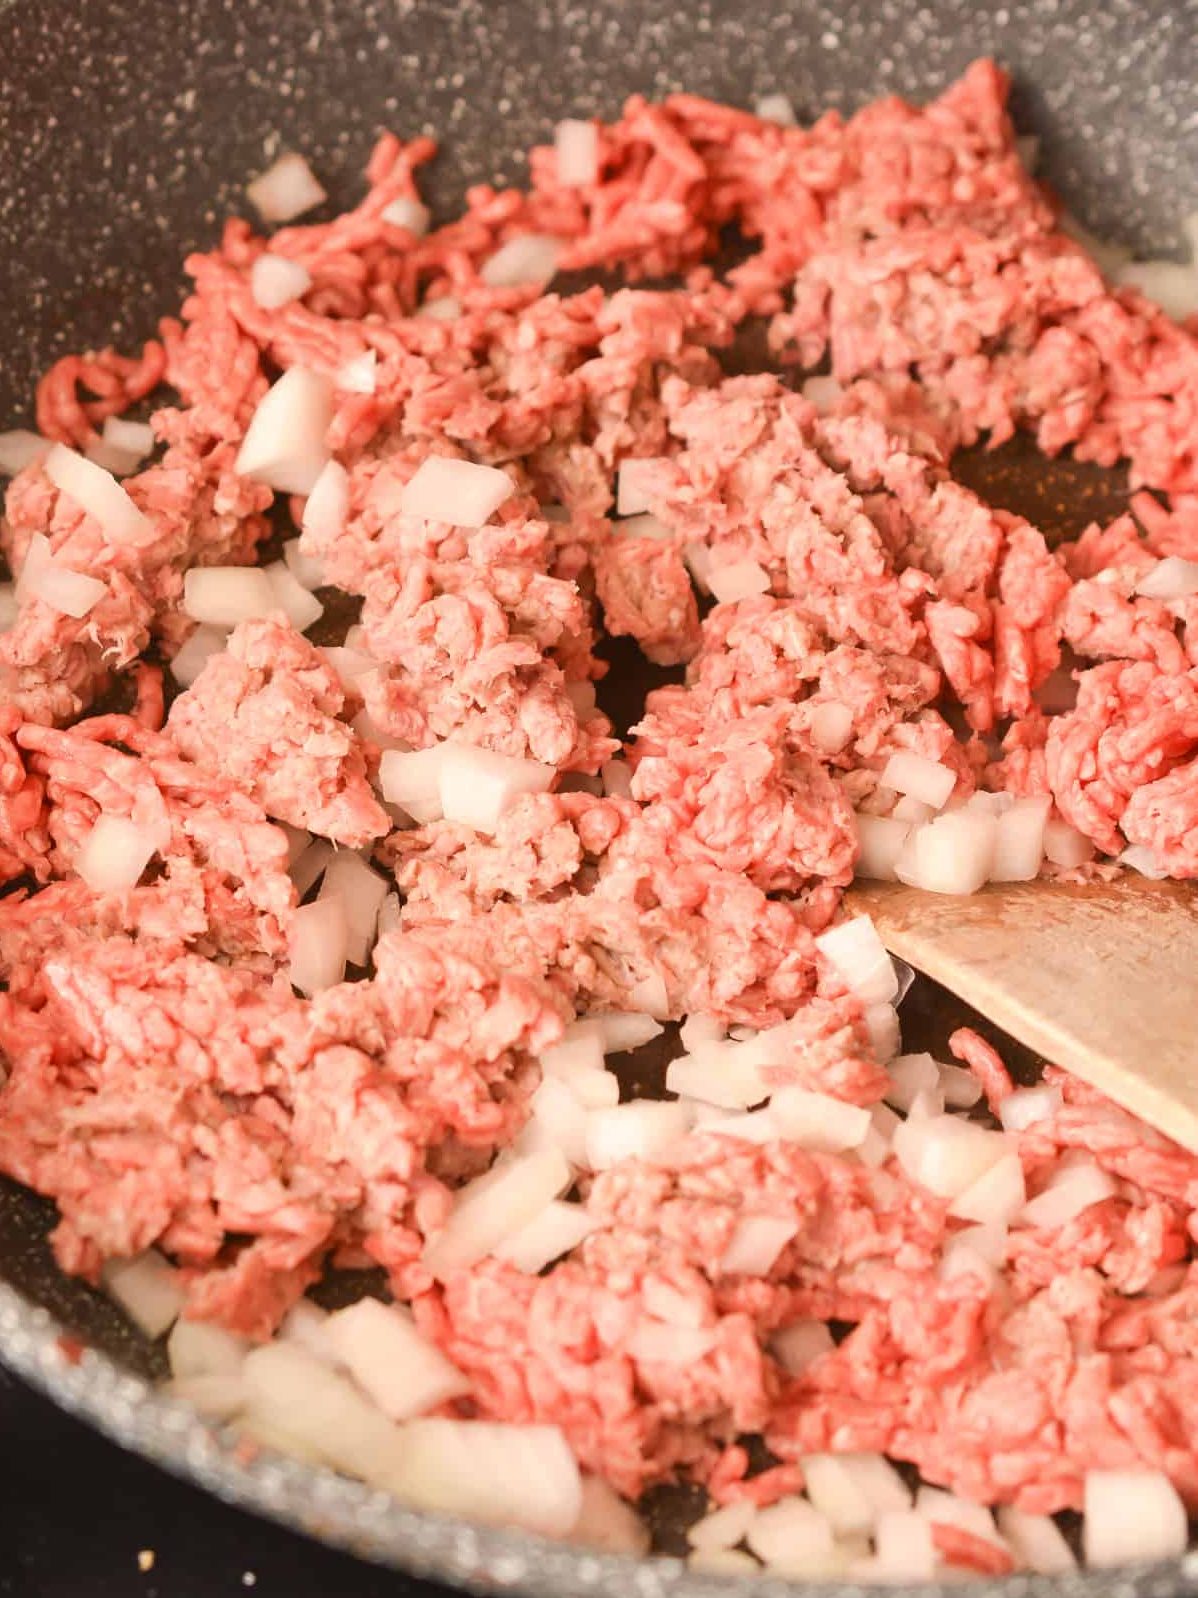 Add the ground beef and onion to a skillet over medium-high heat on the stove.